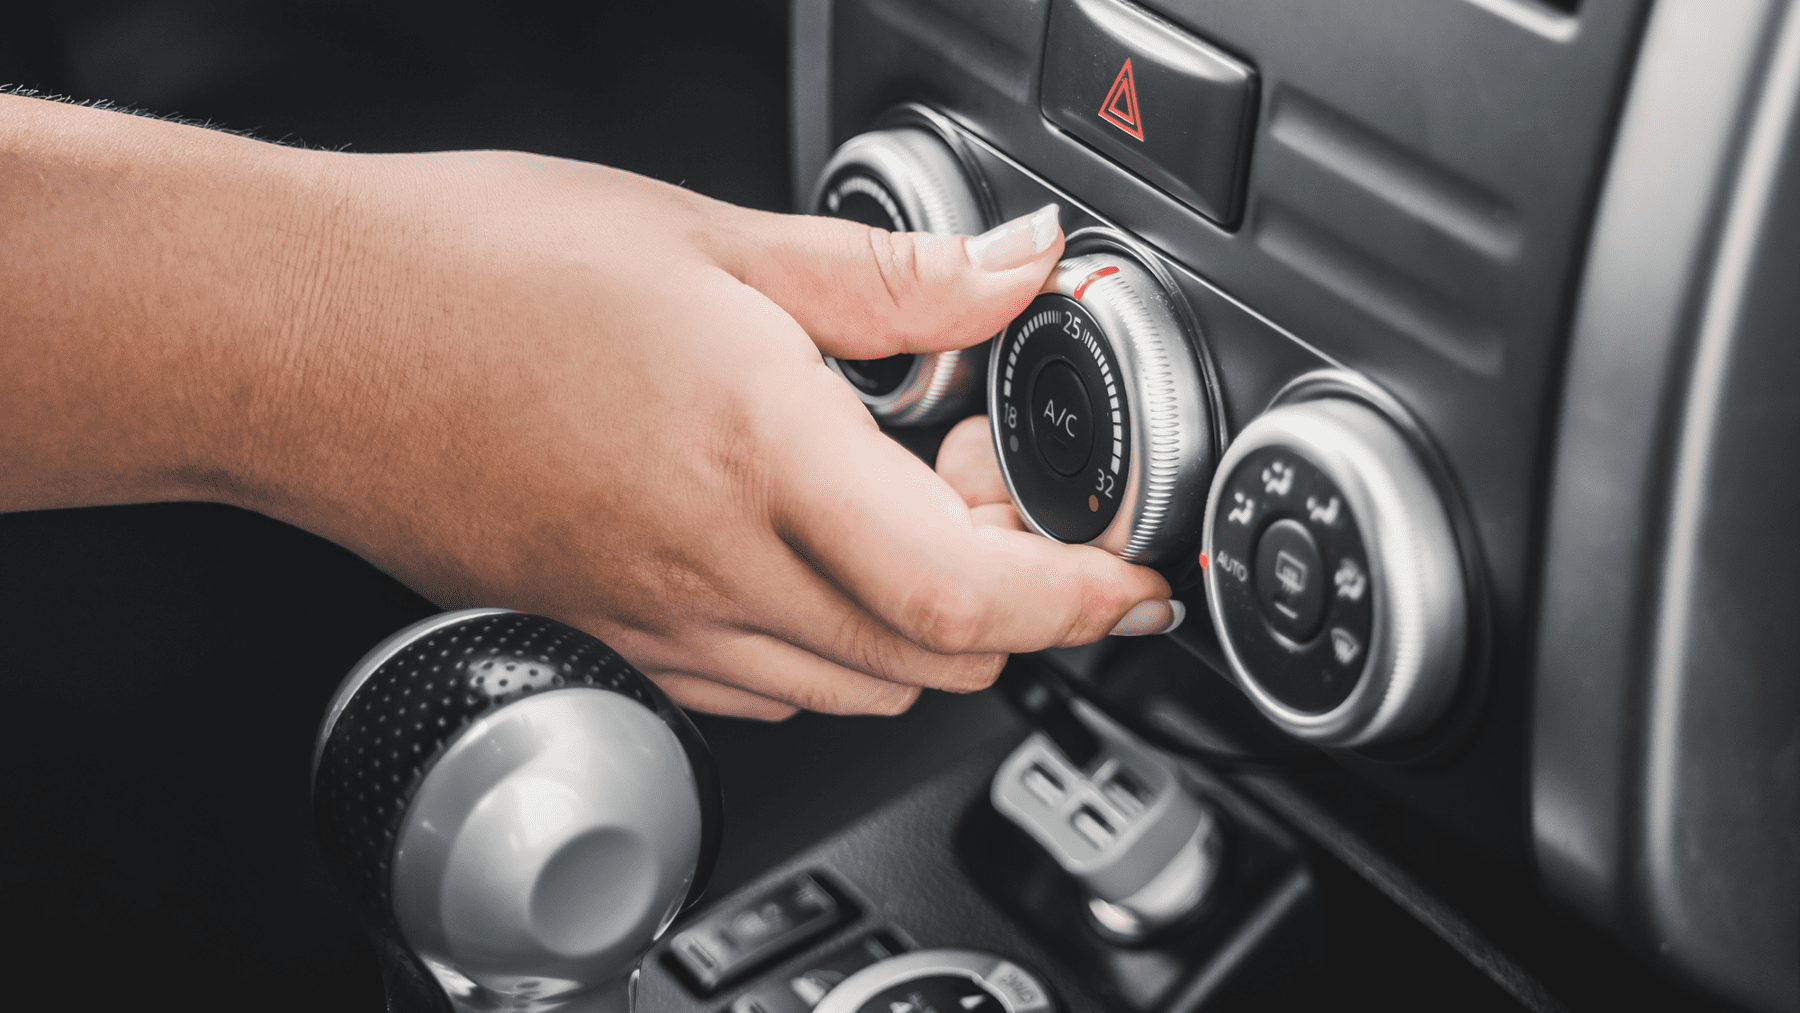 Car Vents Cleaning: The Ultimate Guide to Improve Air Quality and Eliminate  Odors